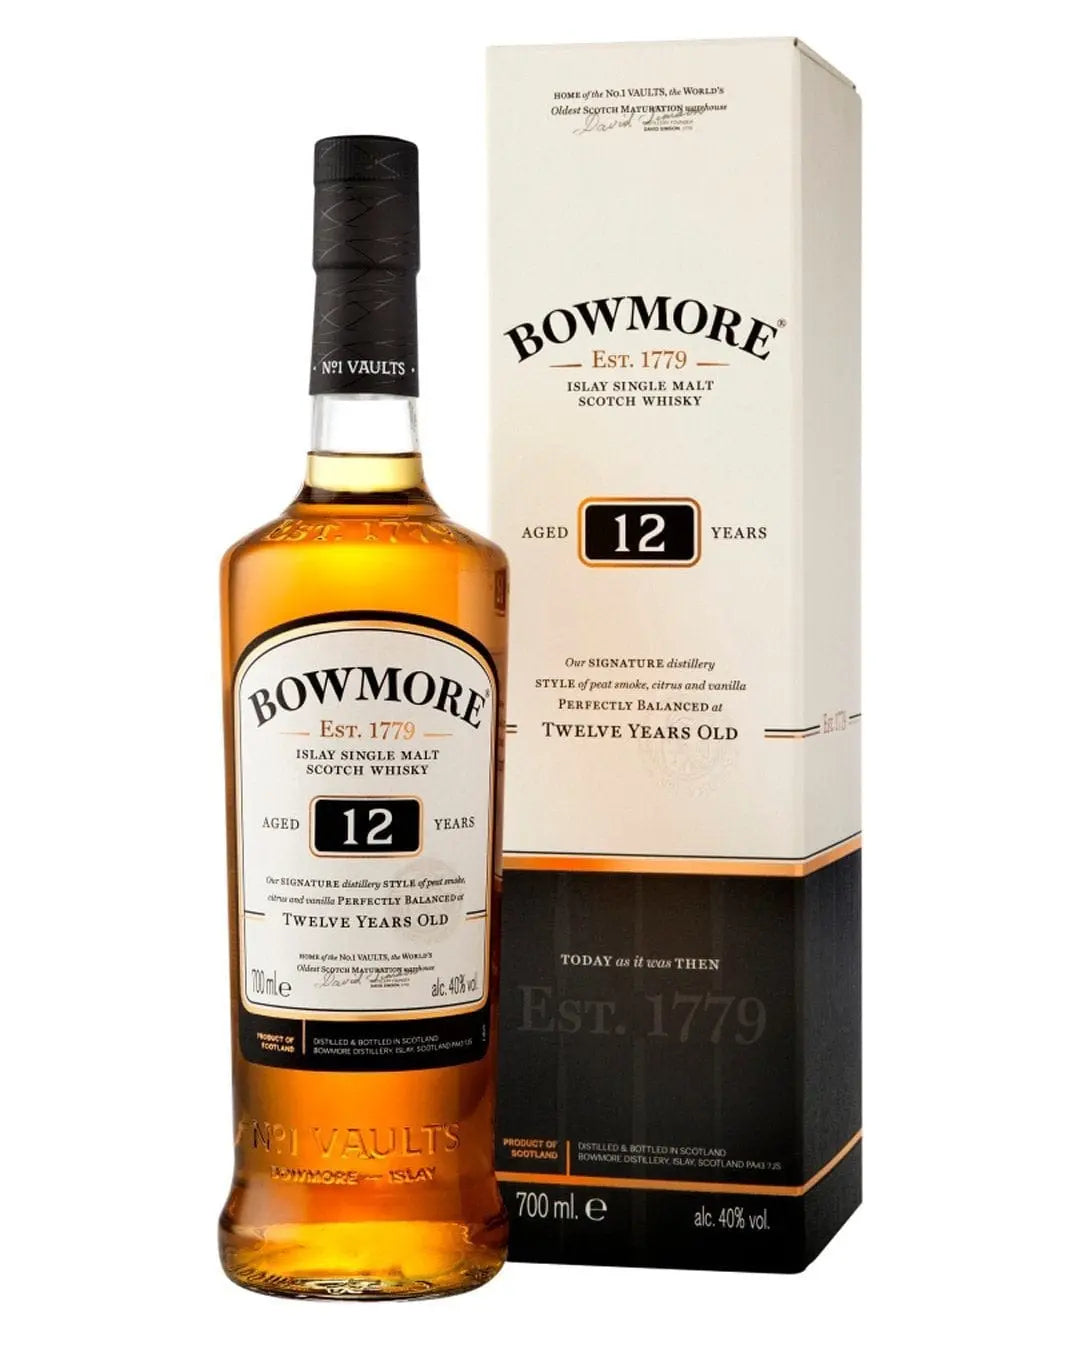 Bowmore 12 Year Old Whisky, 70 cl Whisky 5055753313551